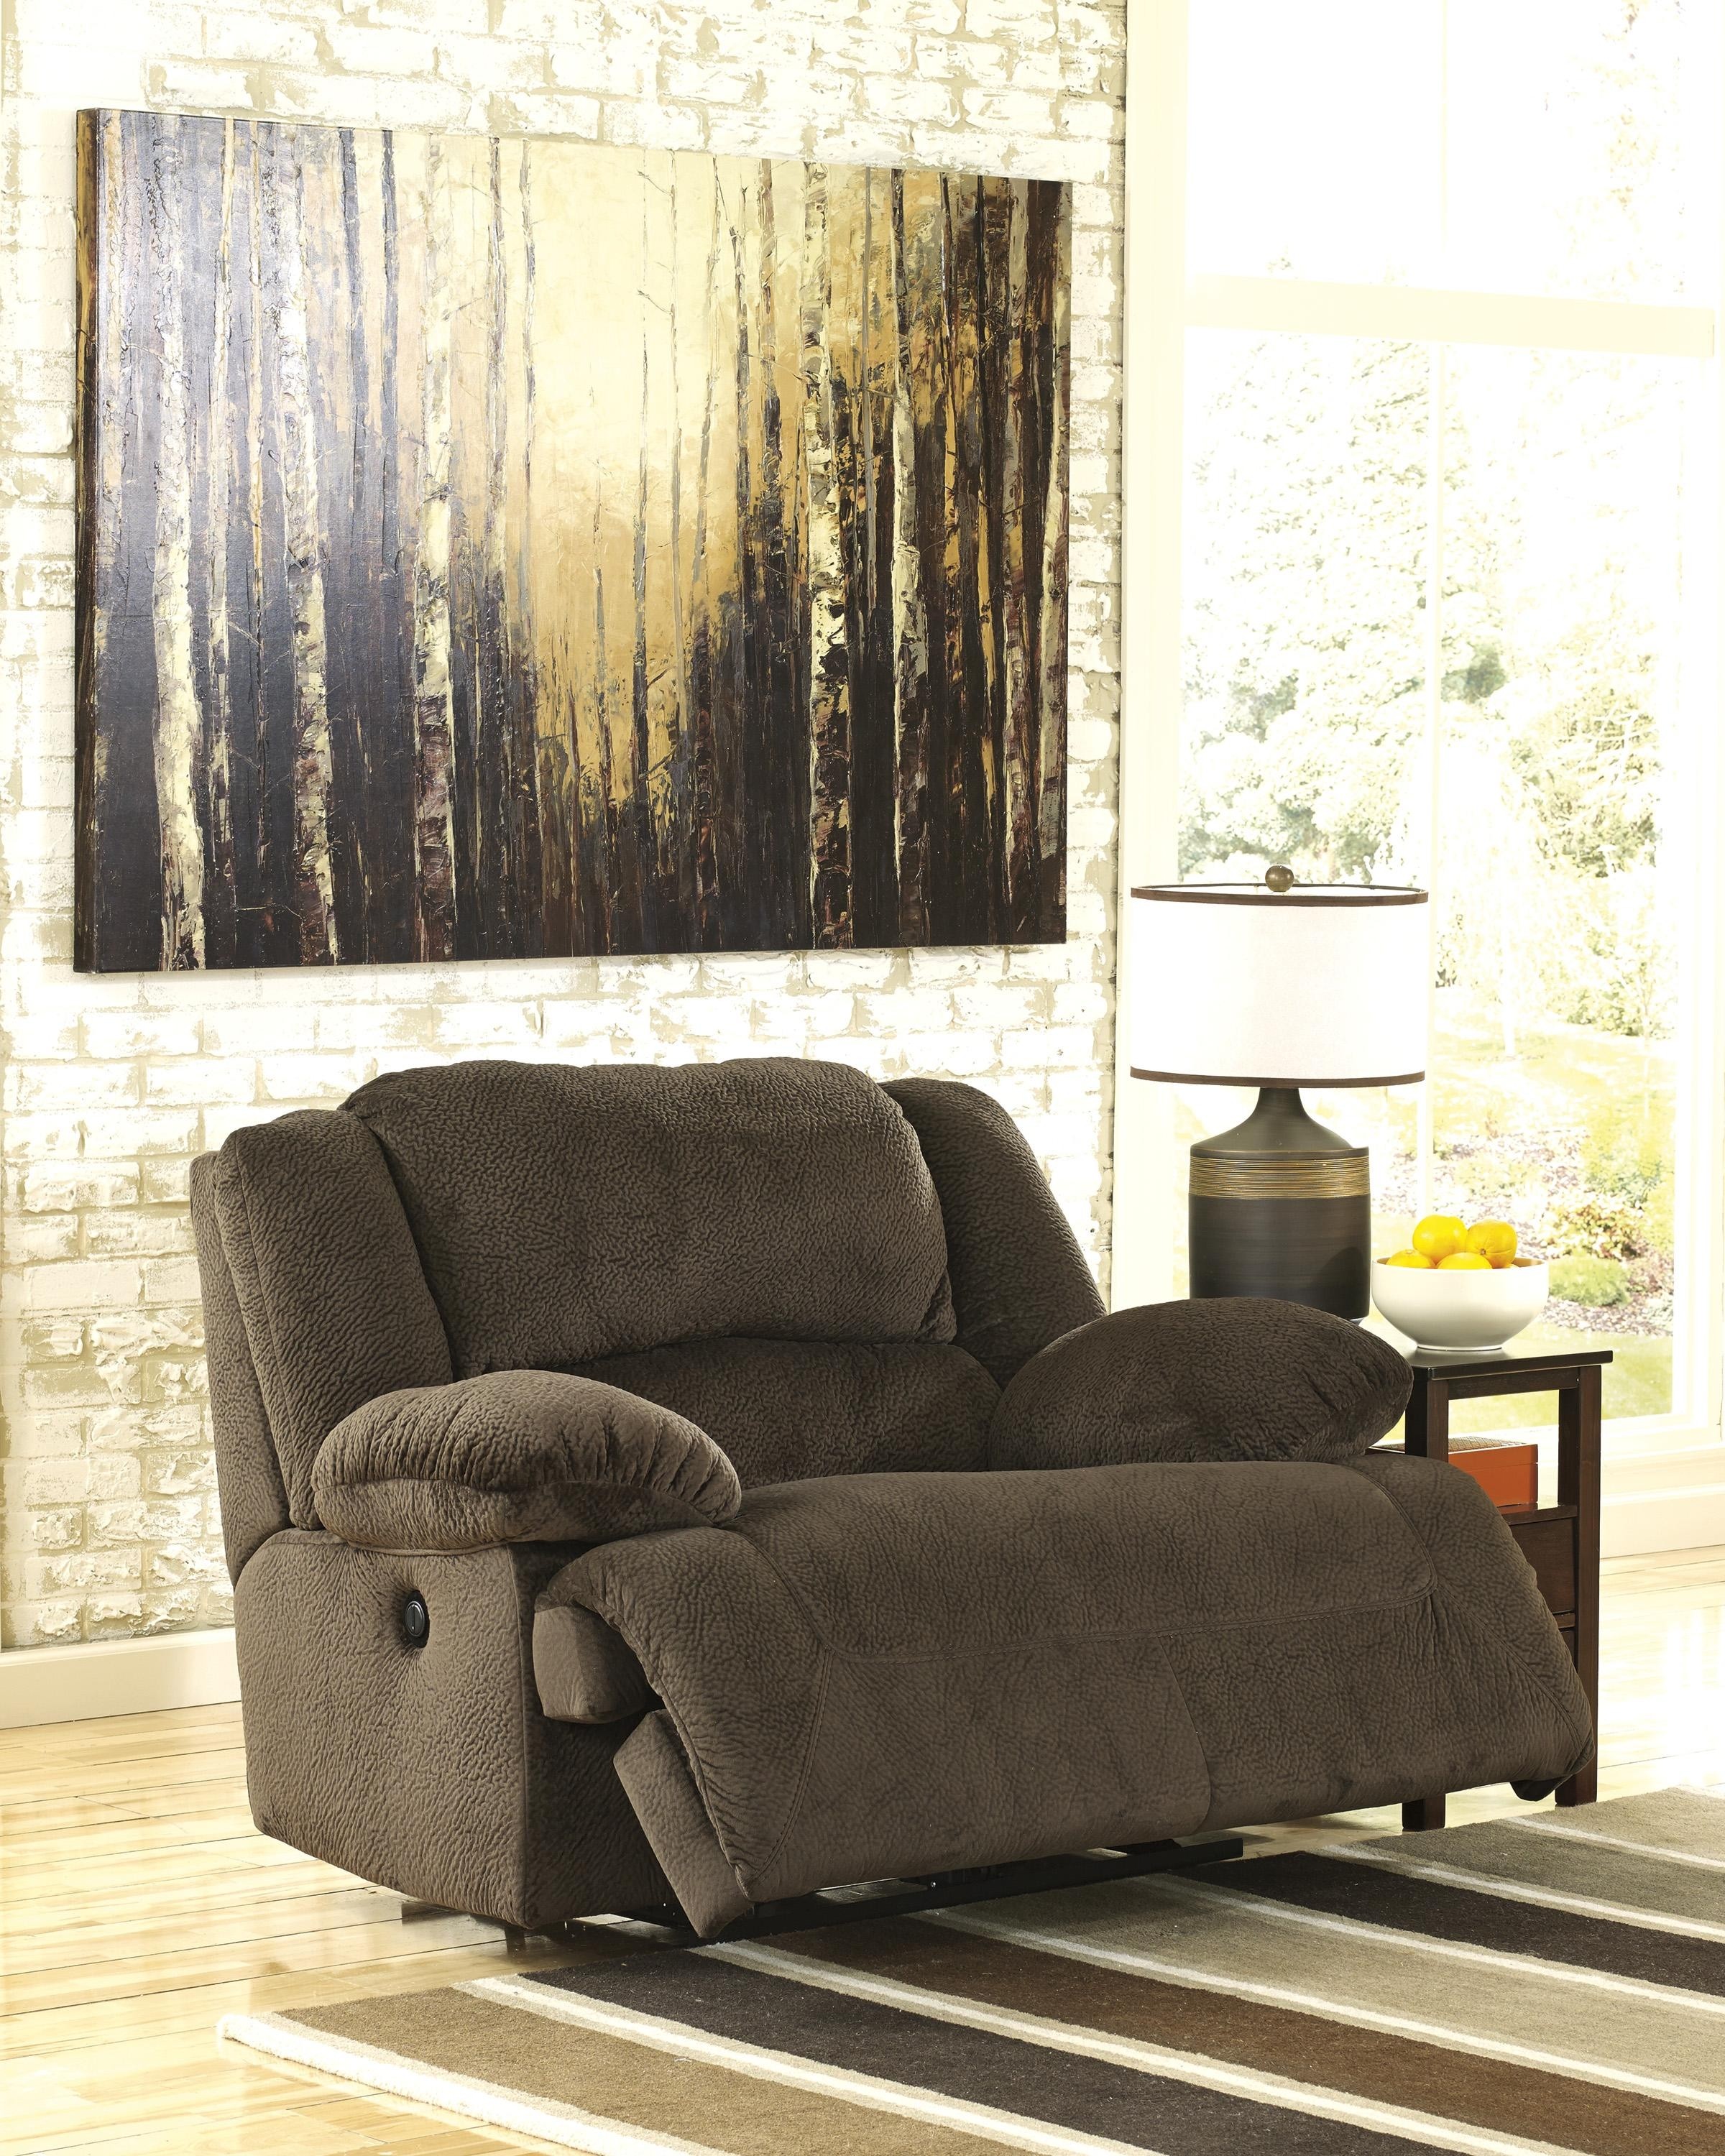 Extra wide recliner chair 1